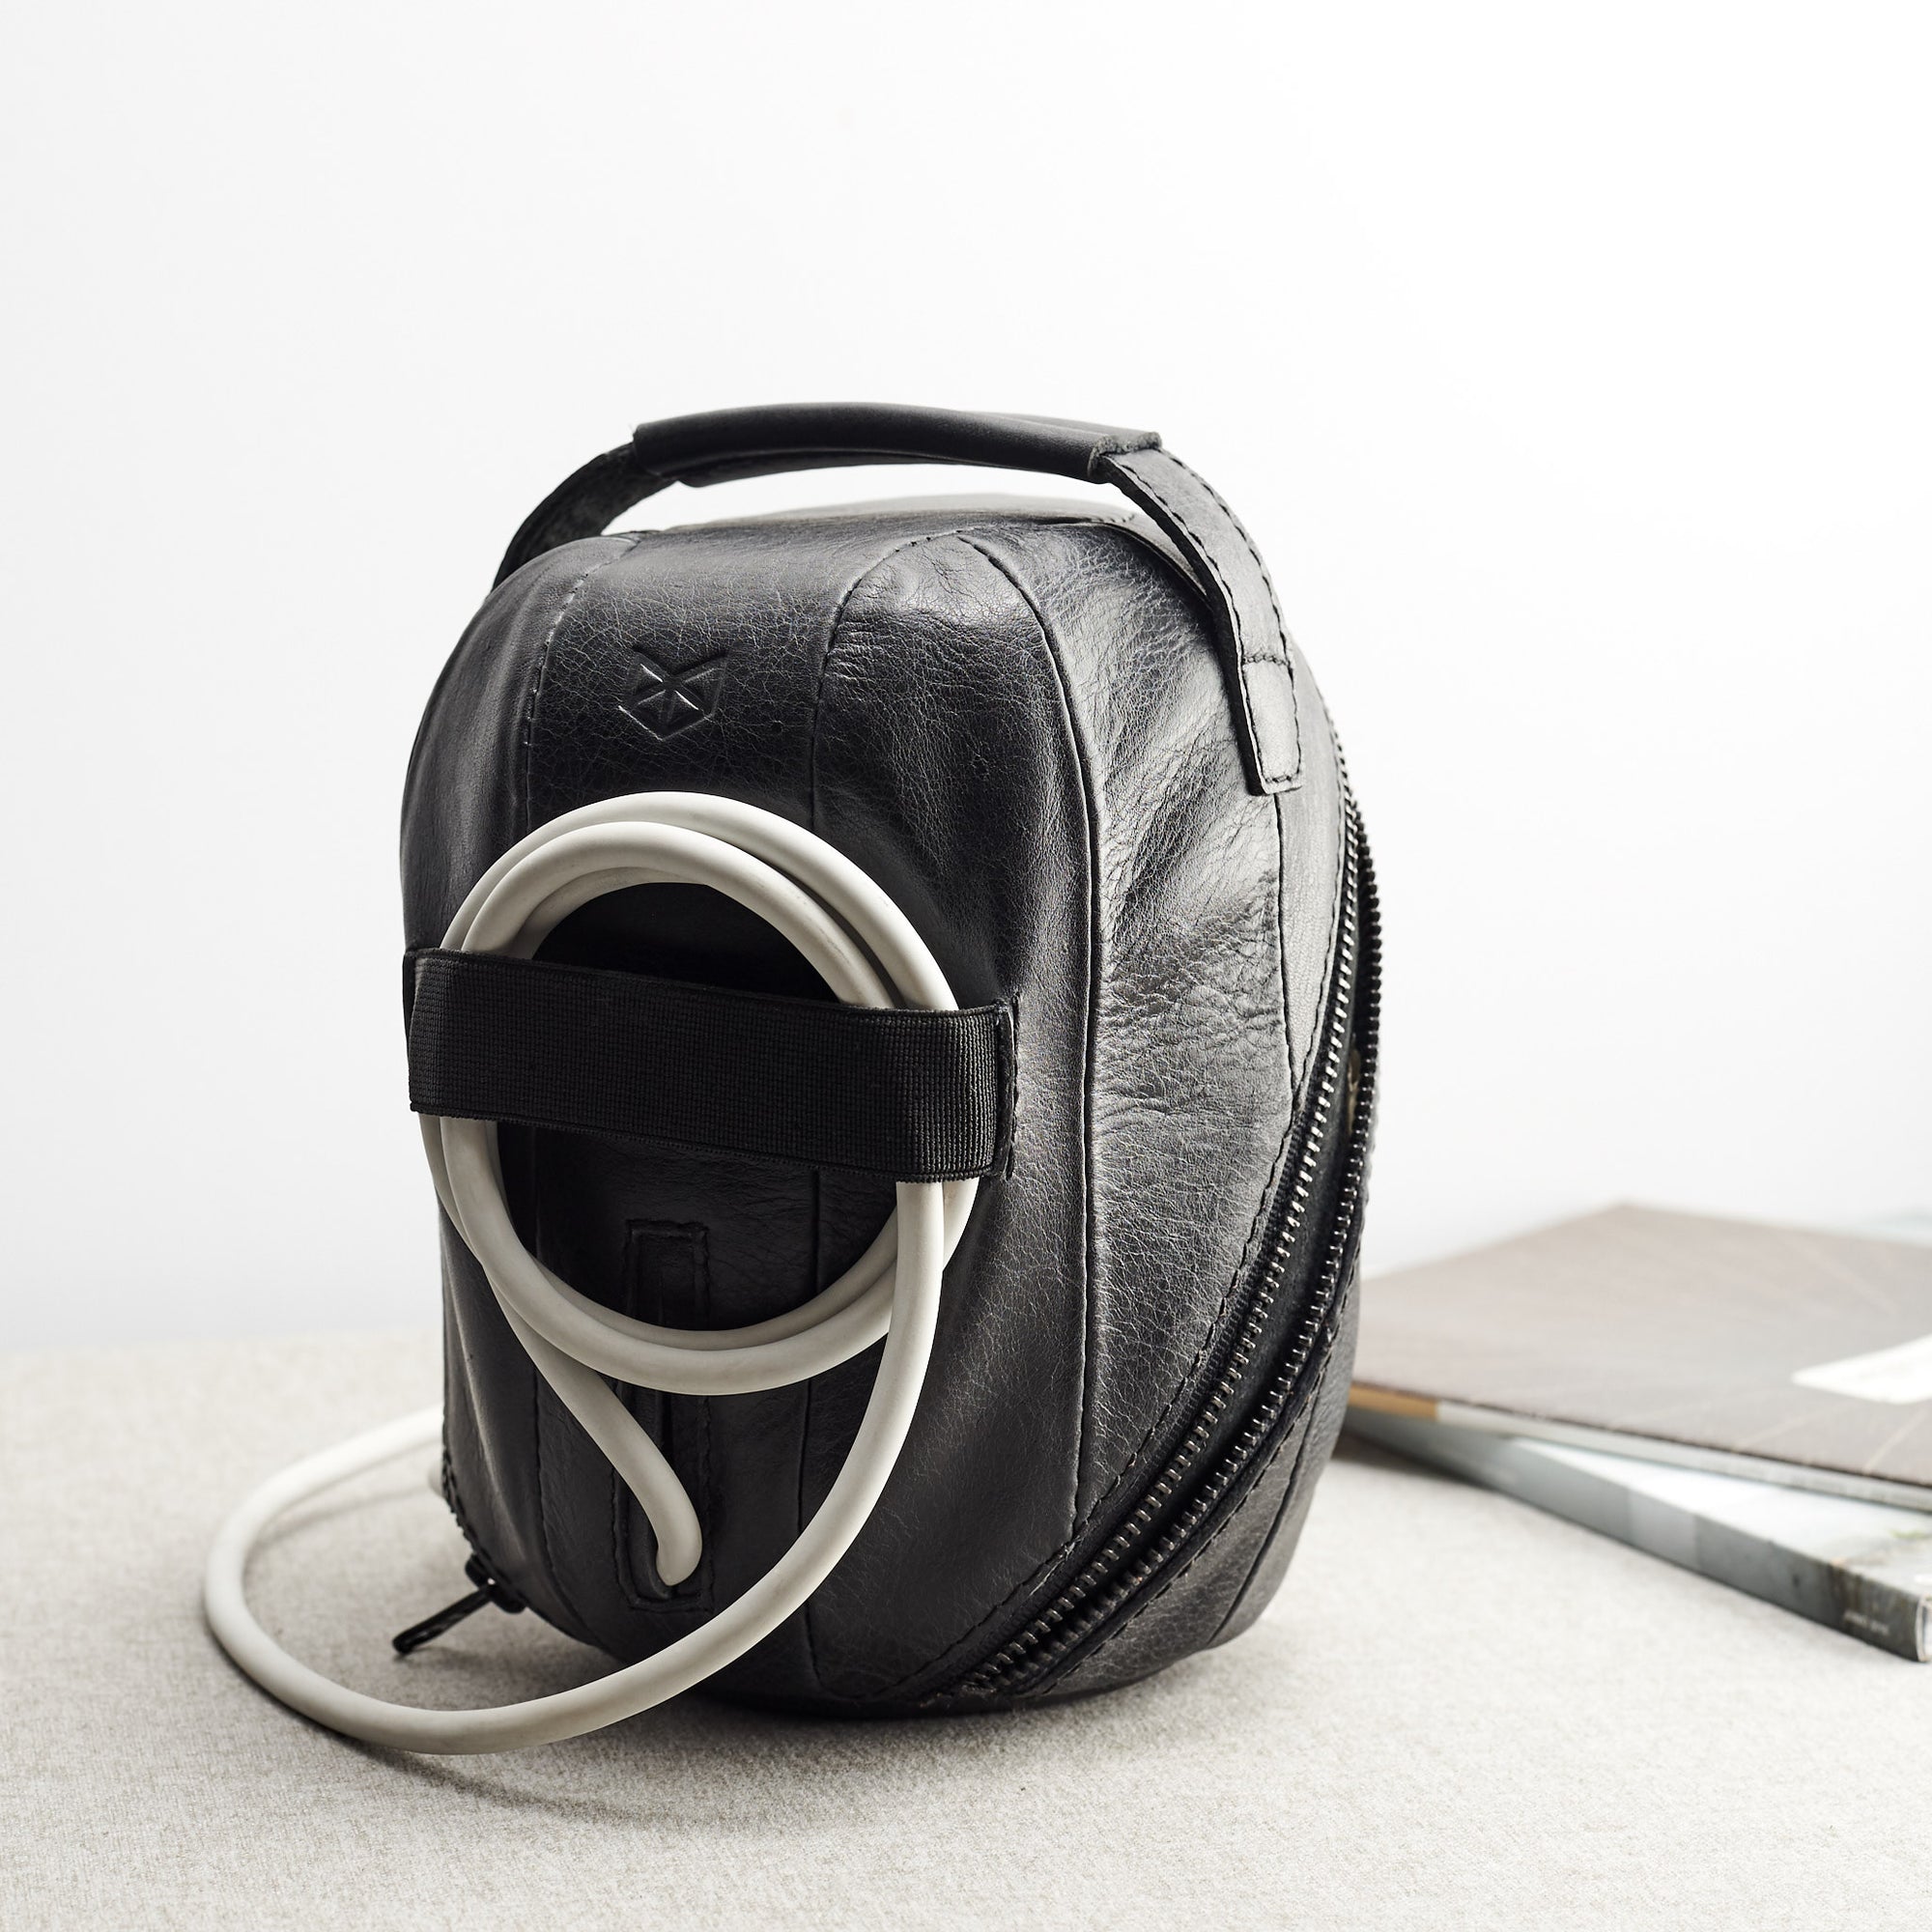 Black elastic band to hold the smart speaker cable. HomePod black leather travel carrying case.